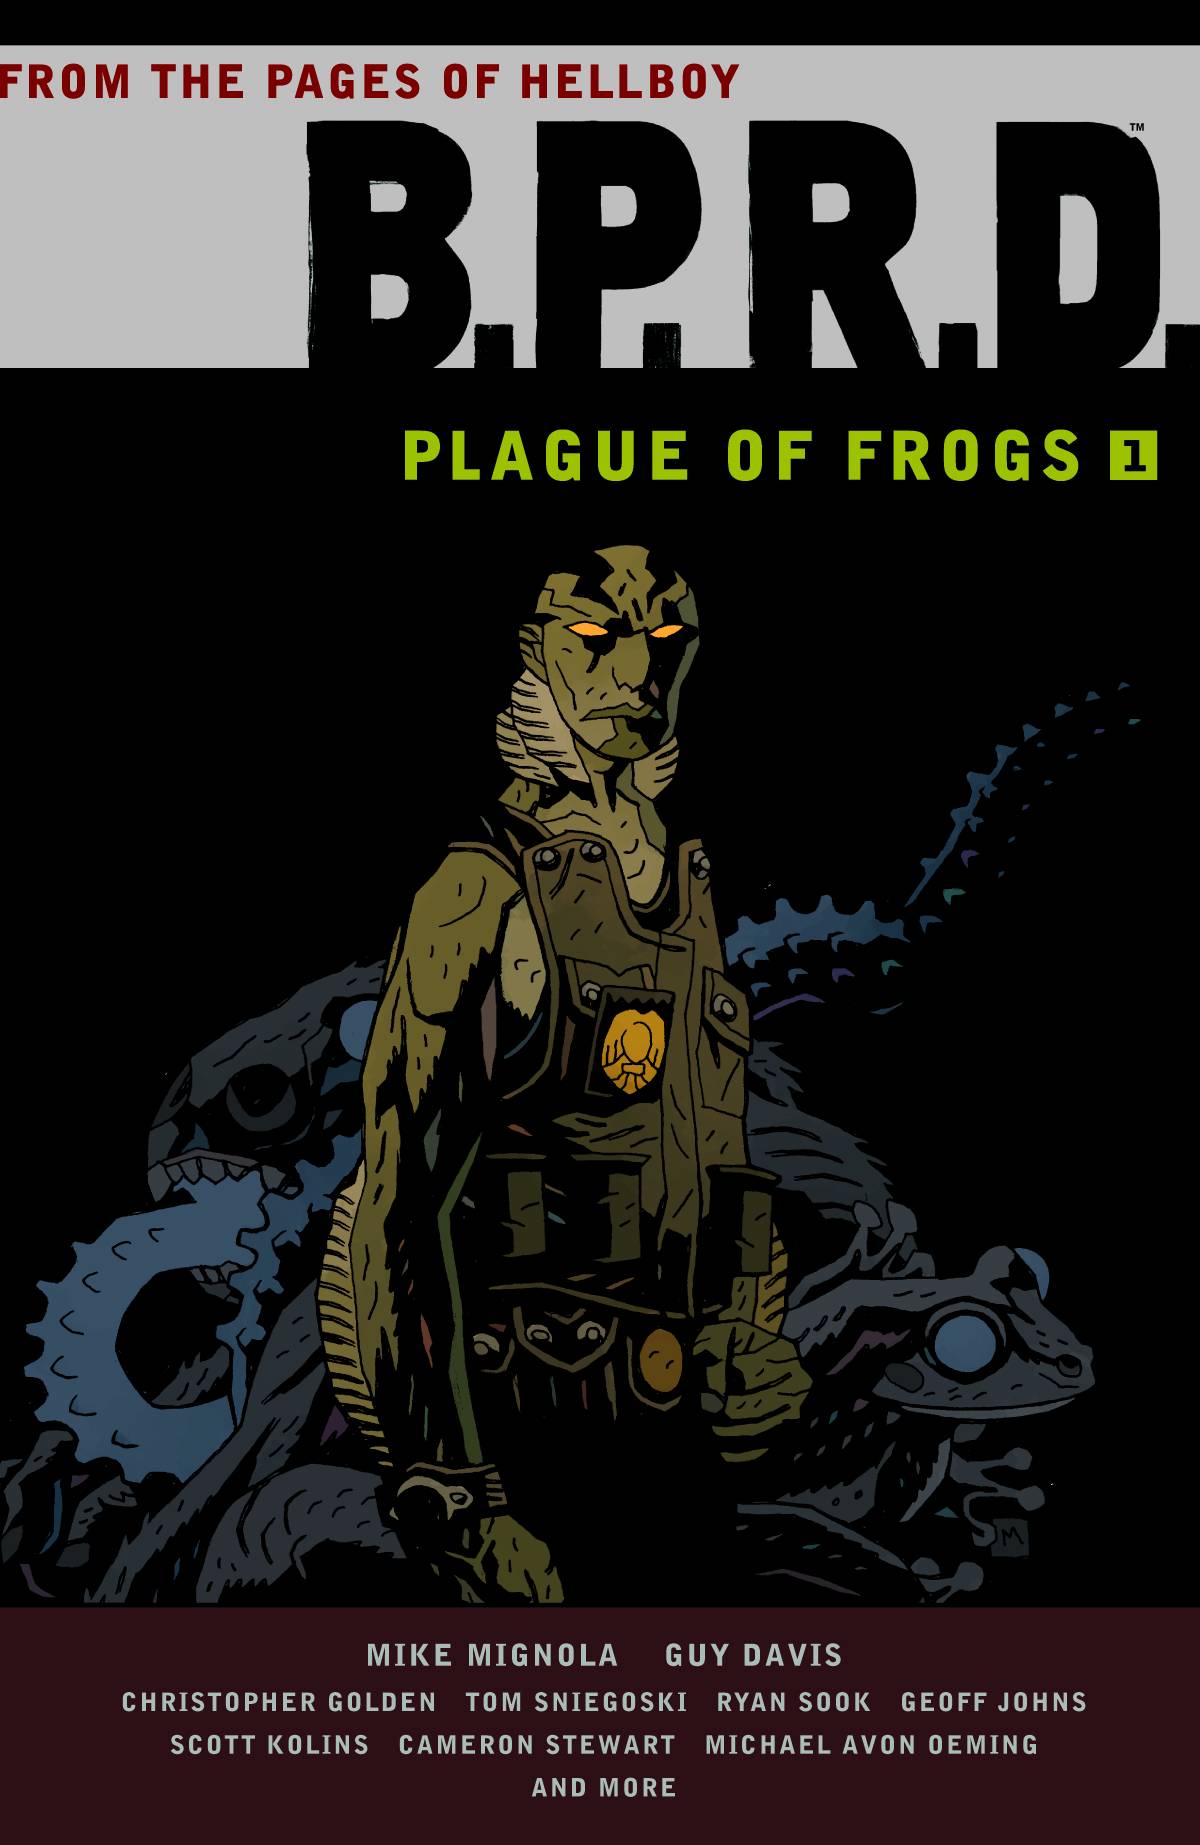 B.P.R.D. Plague of Frogs Hardcover Volume 1